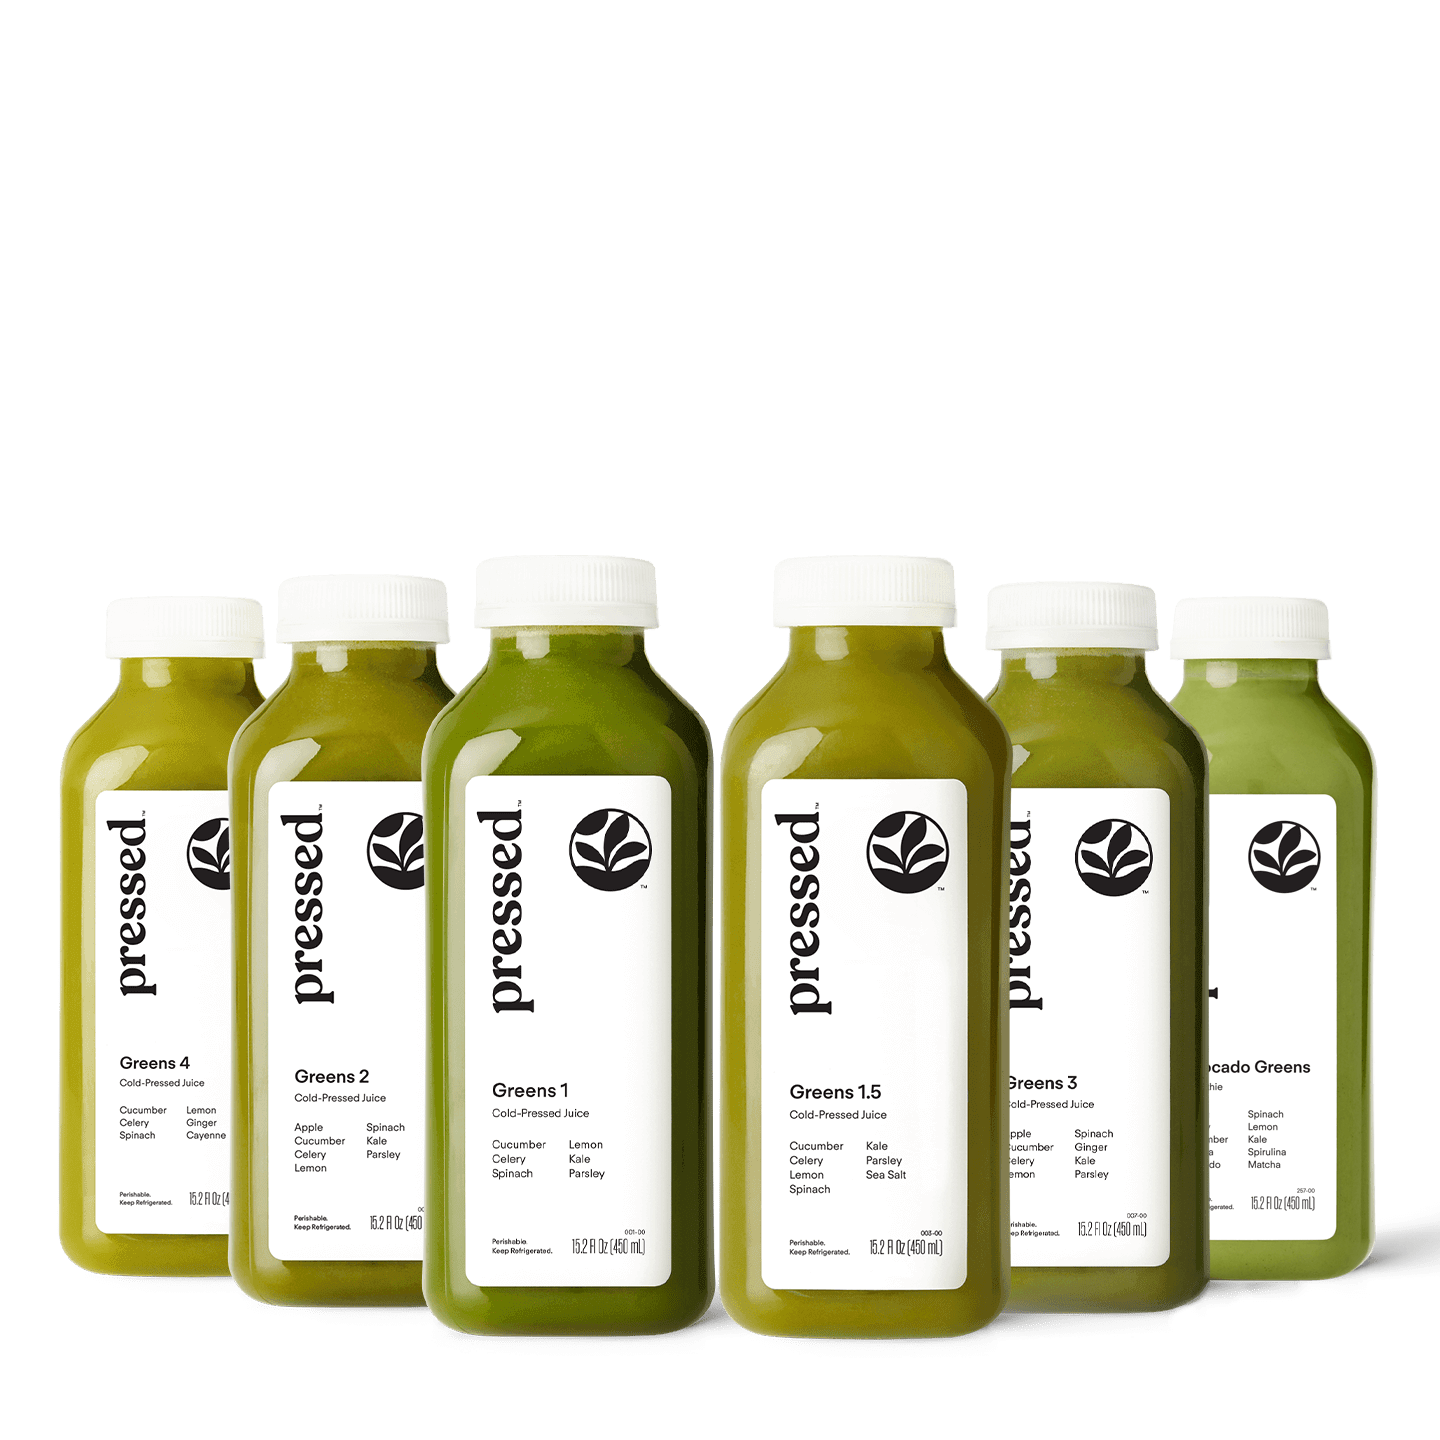 https://pressed-product-images.s3.us-west-1.amazonaws.com/products/large/DailyGreens6Pack.png